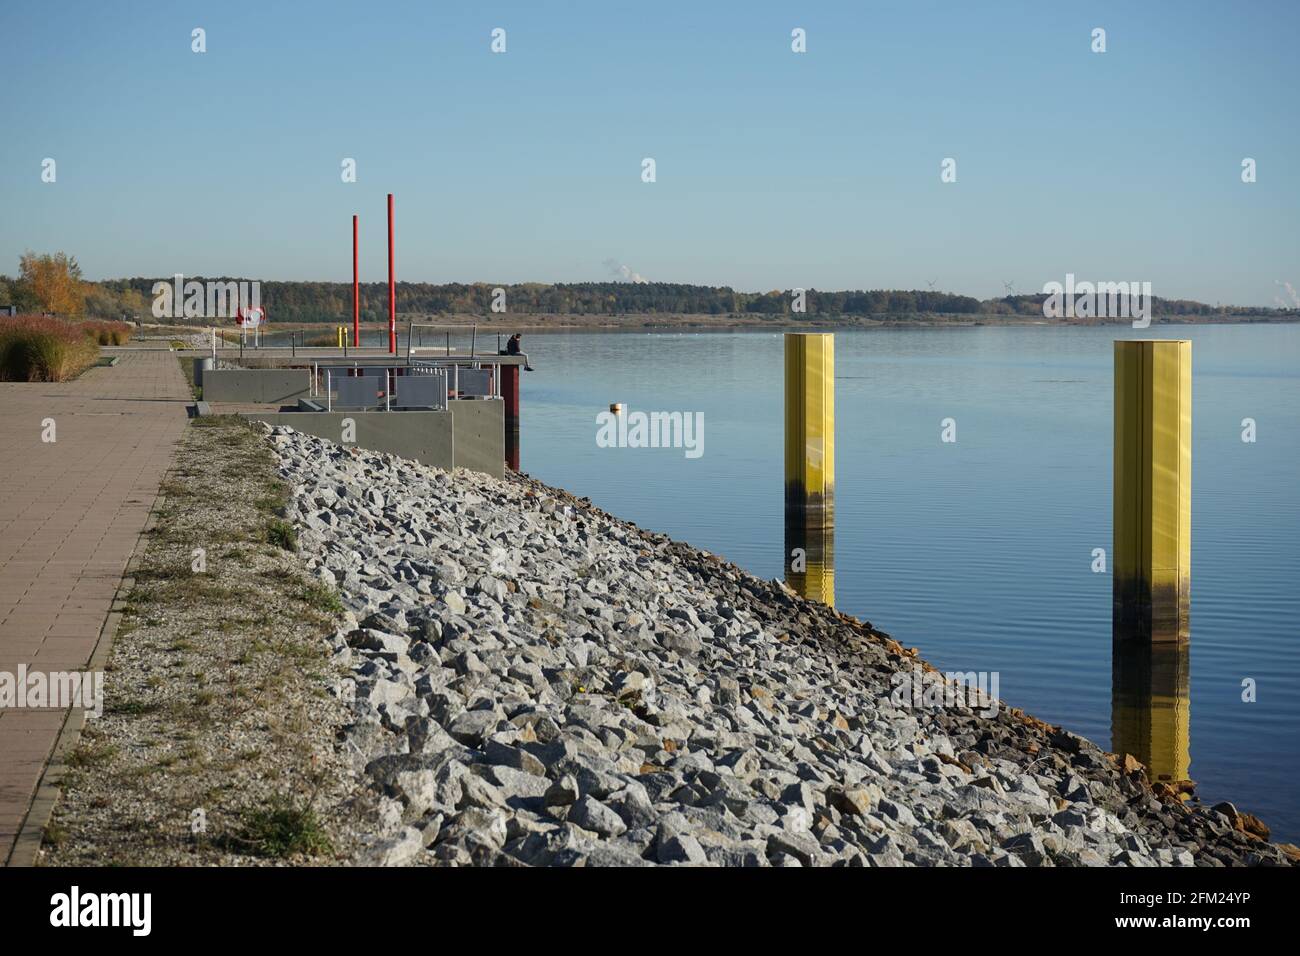 Port facility in Brandenburg at the artificial, new lake Stock Photo